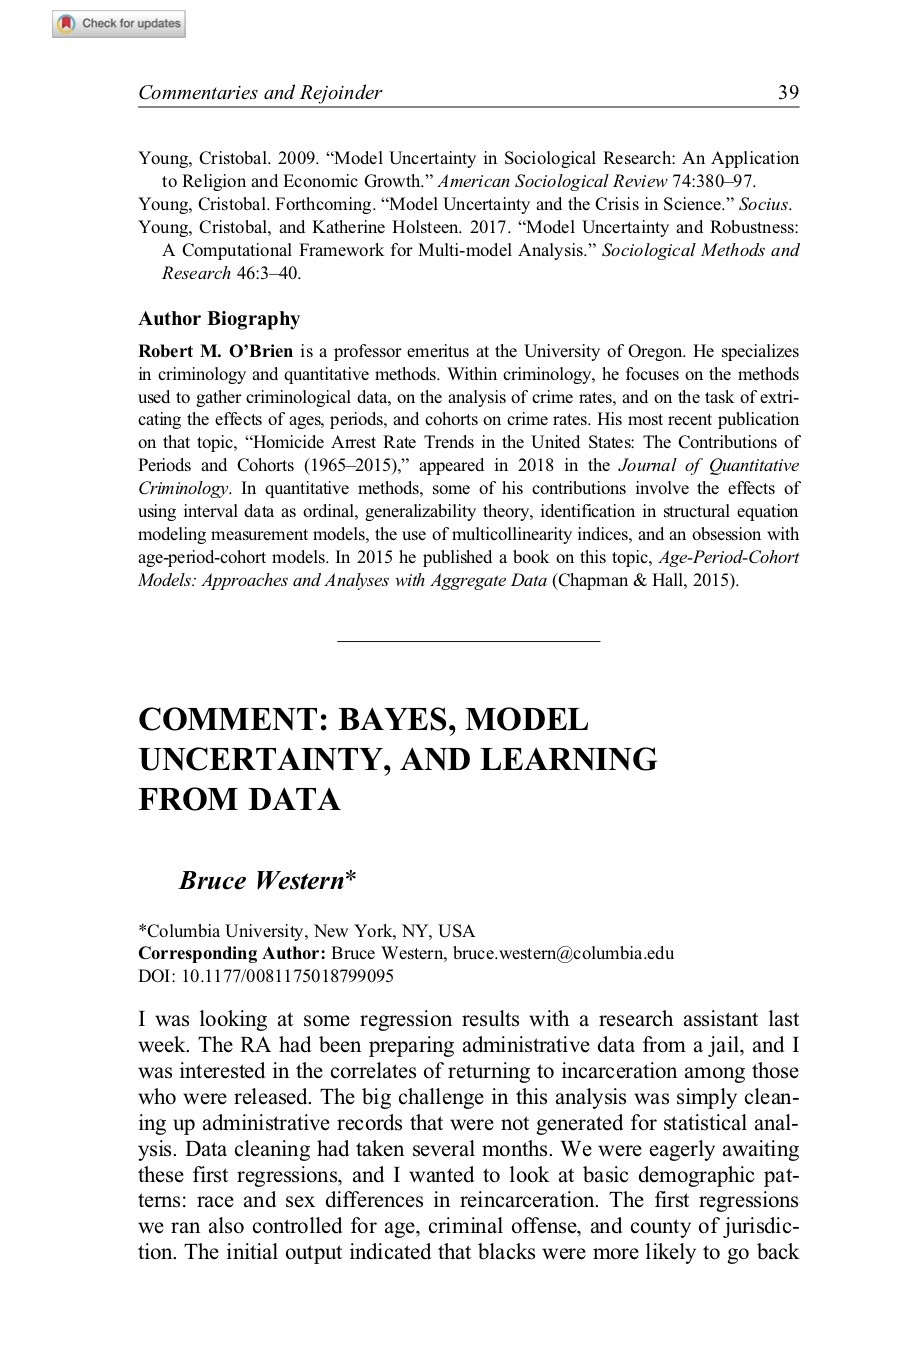 Bayes, Model Uncertainty, and Learning from Data